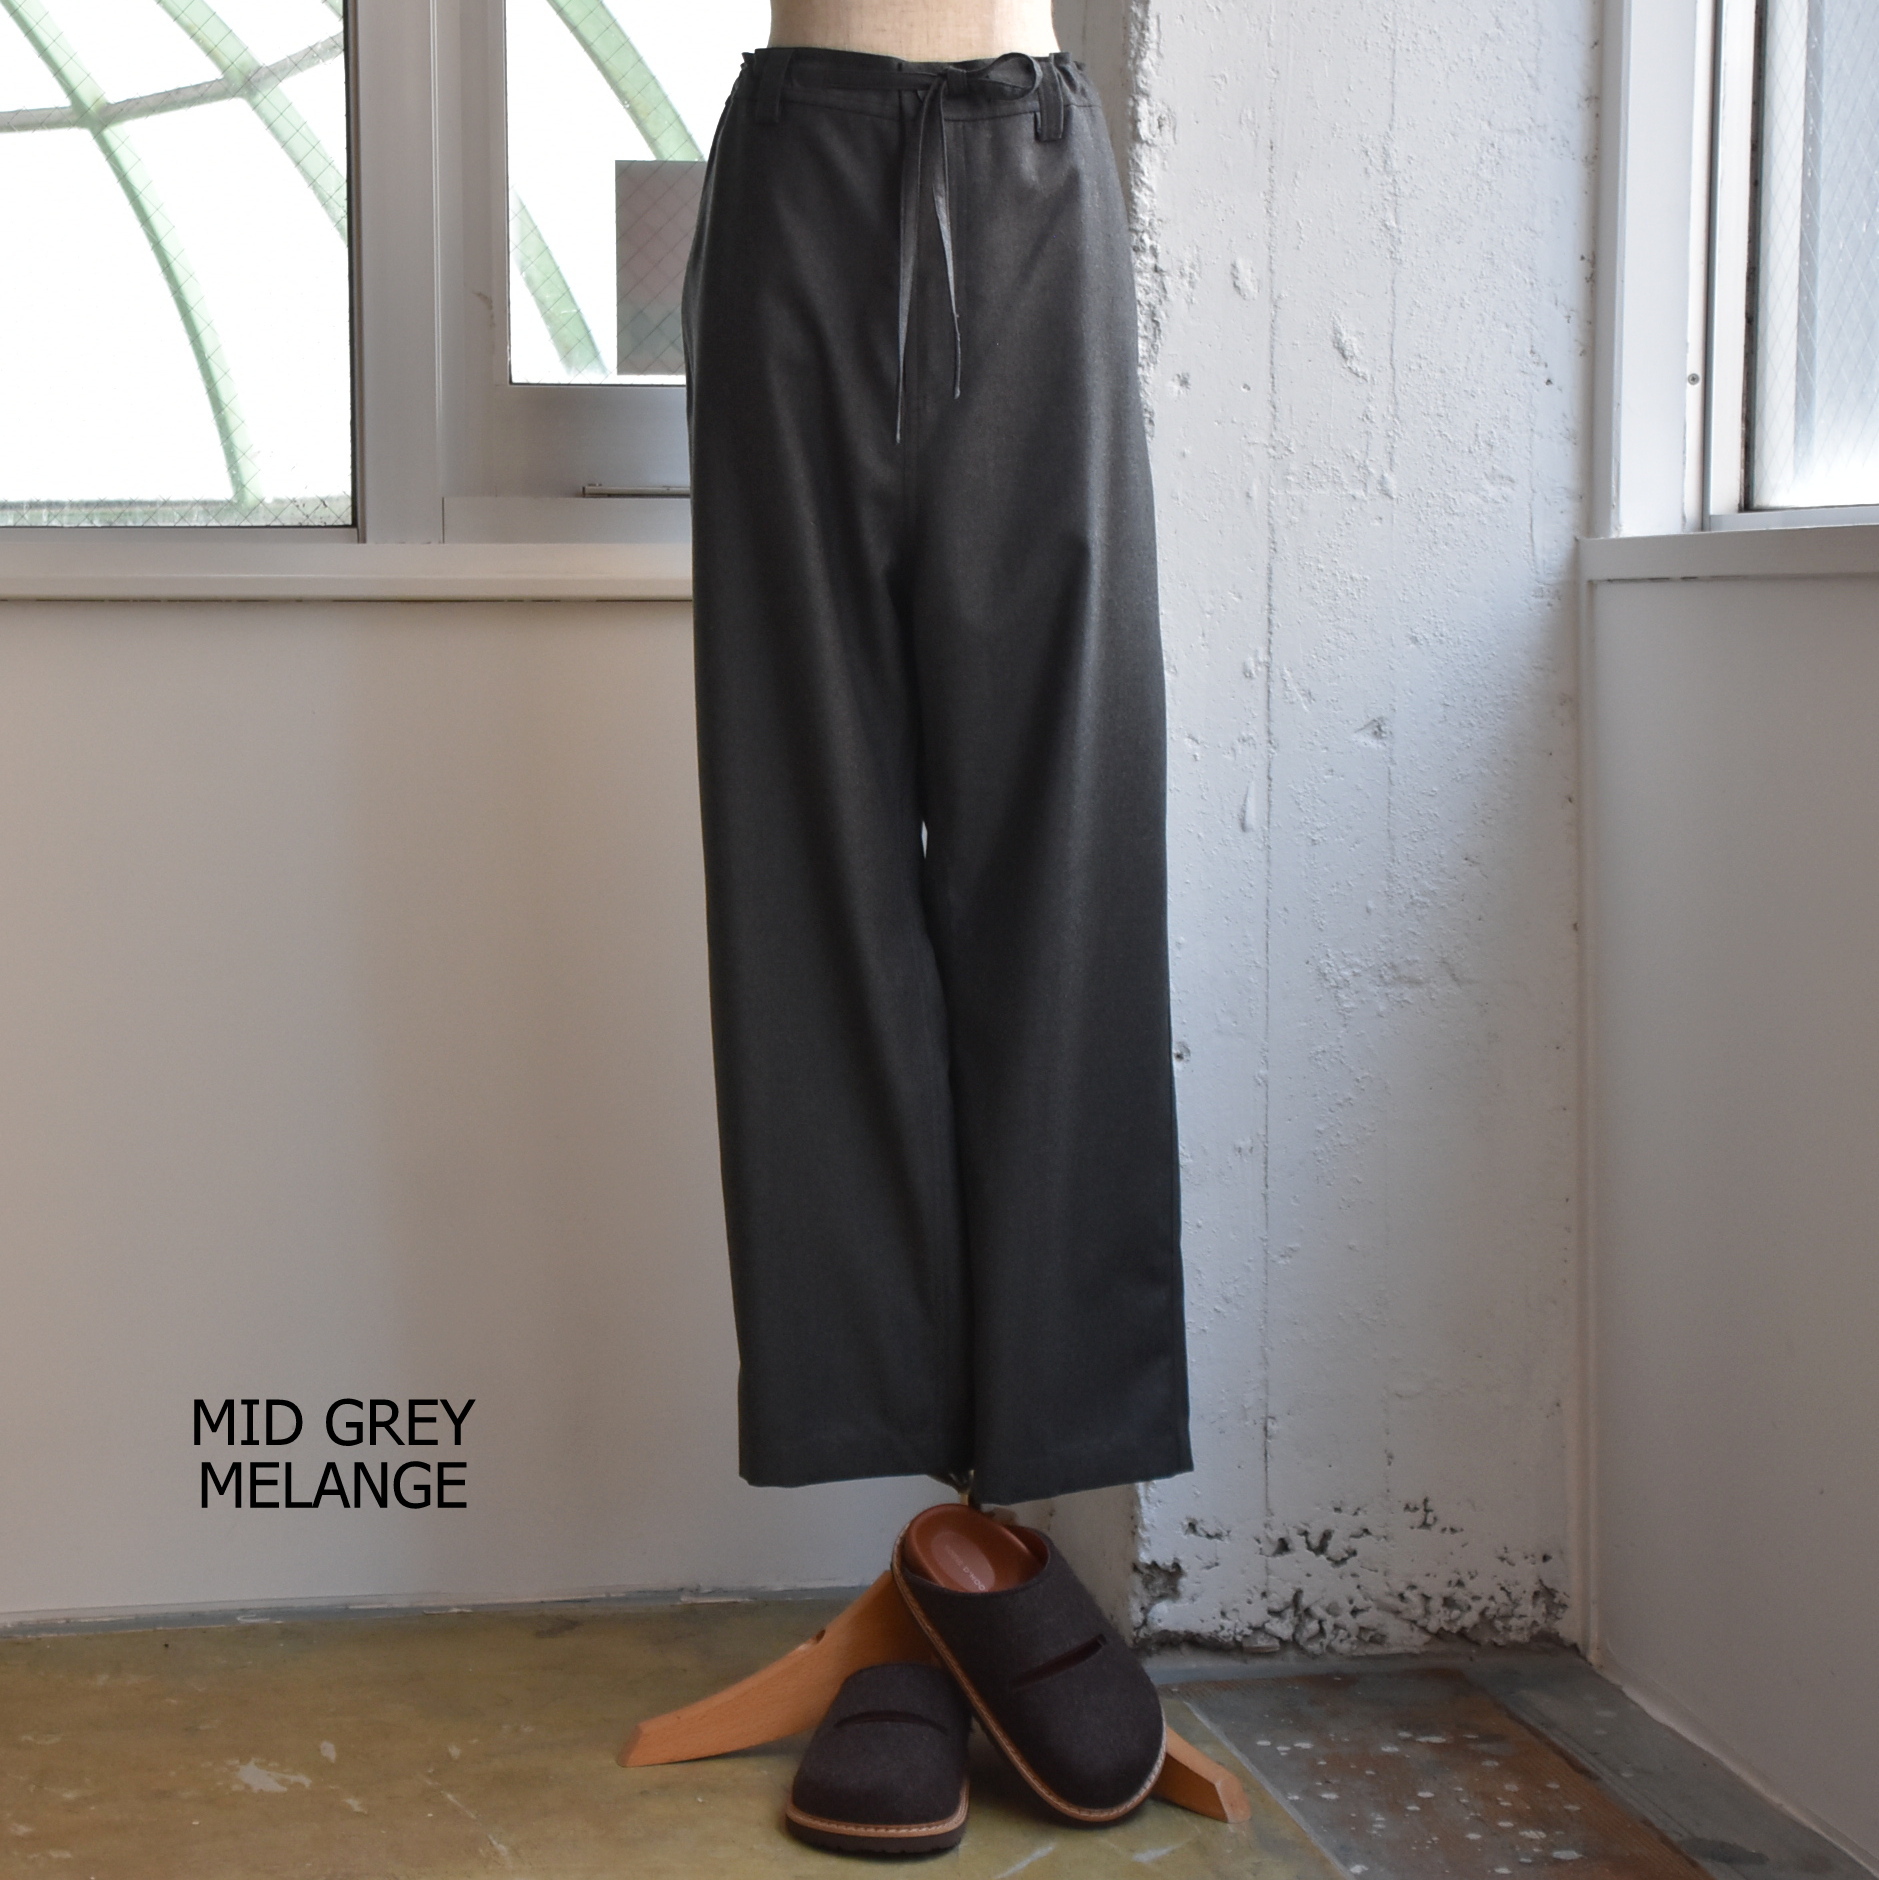 SOFIE D'HOORE(ソフィードール) / Low crotch pants with zip and drawstring【2色展開】(5)